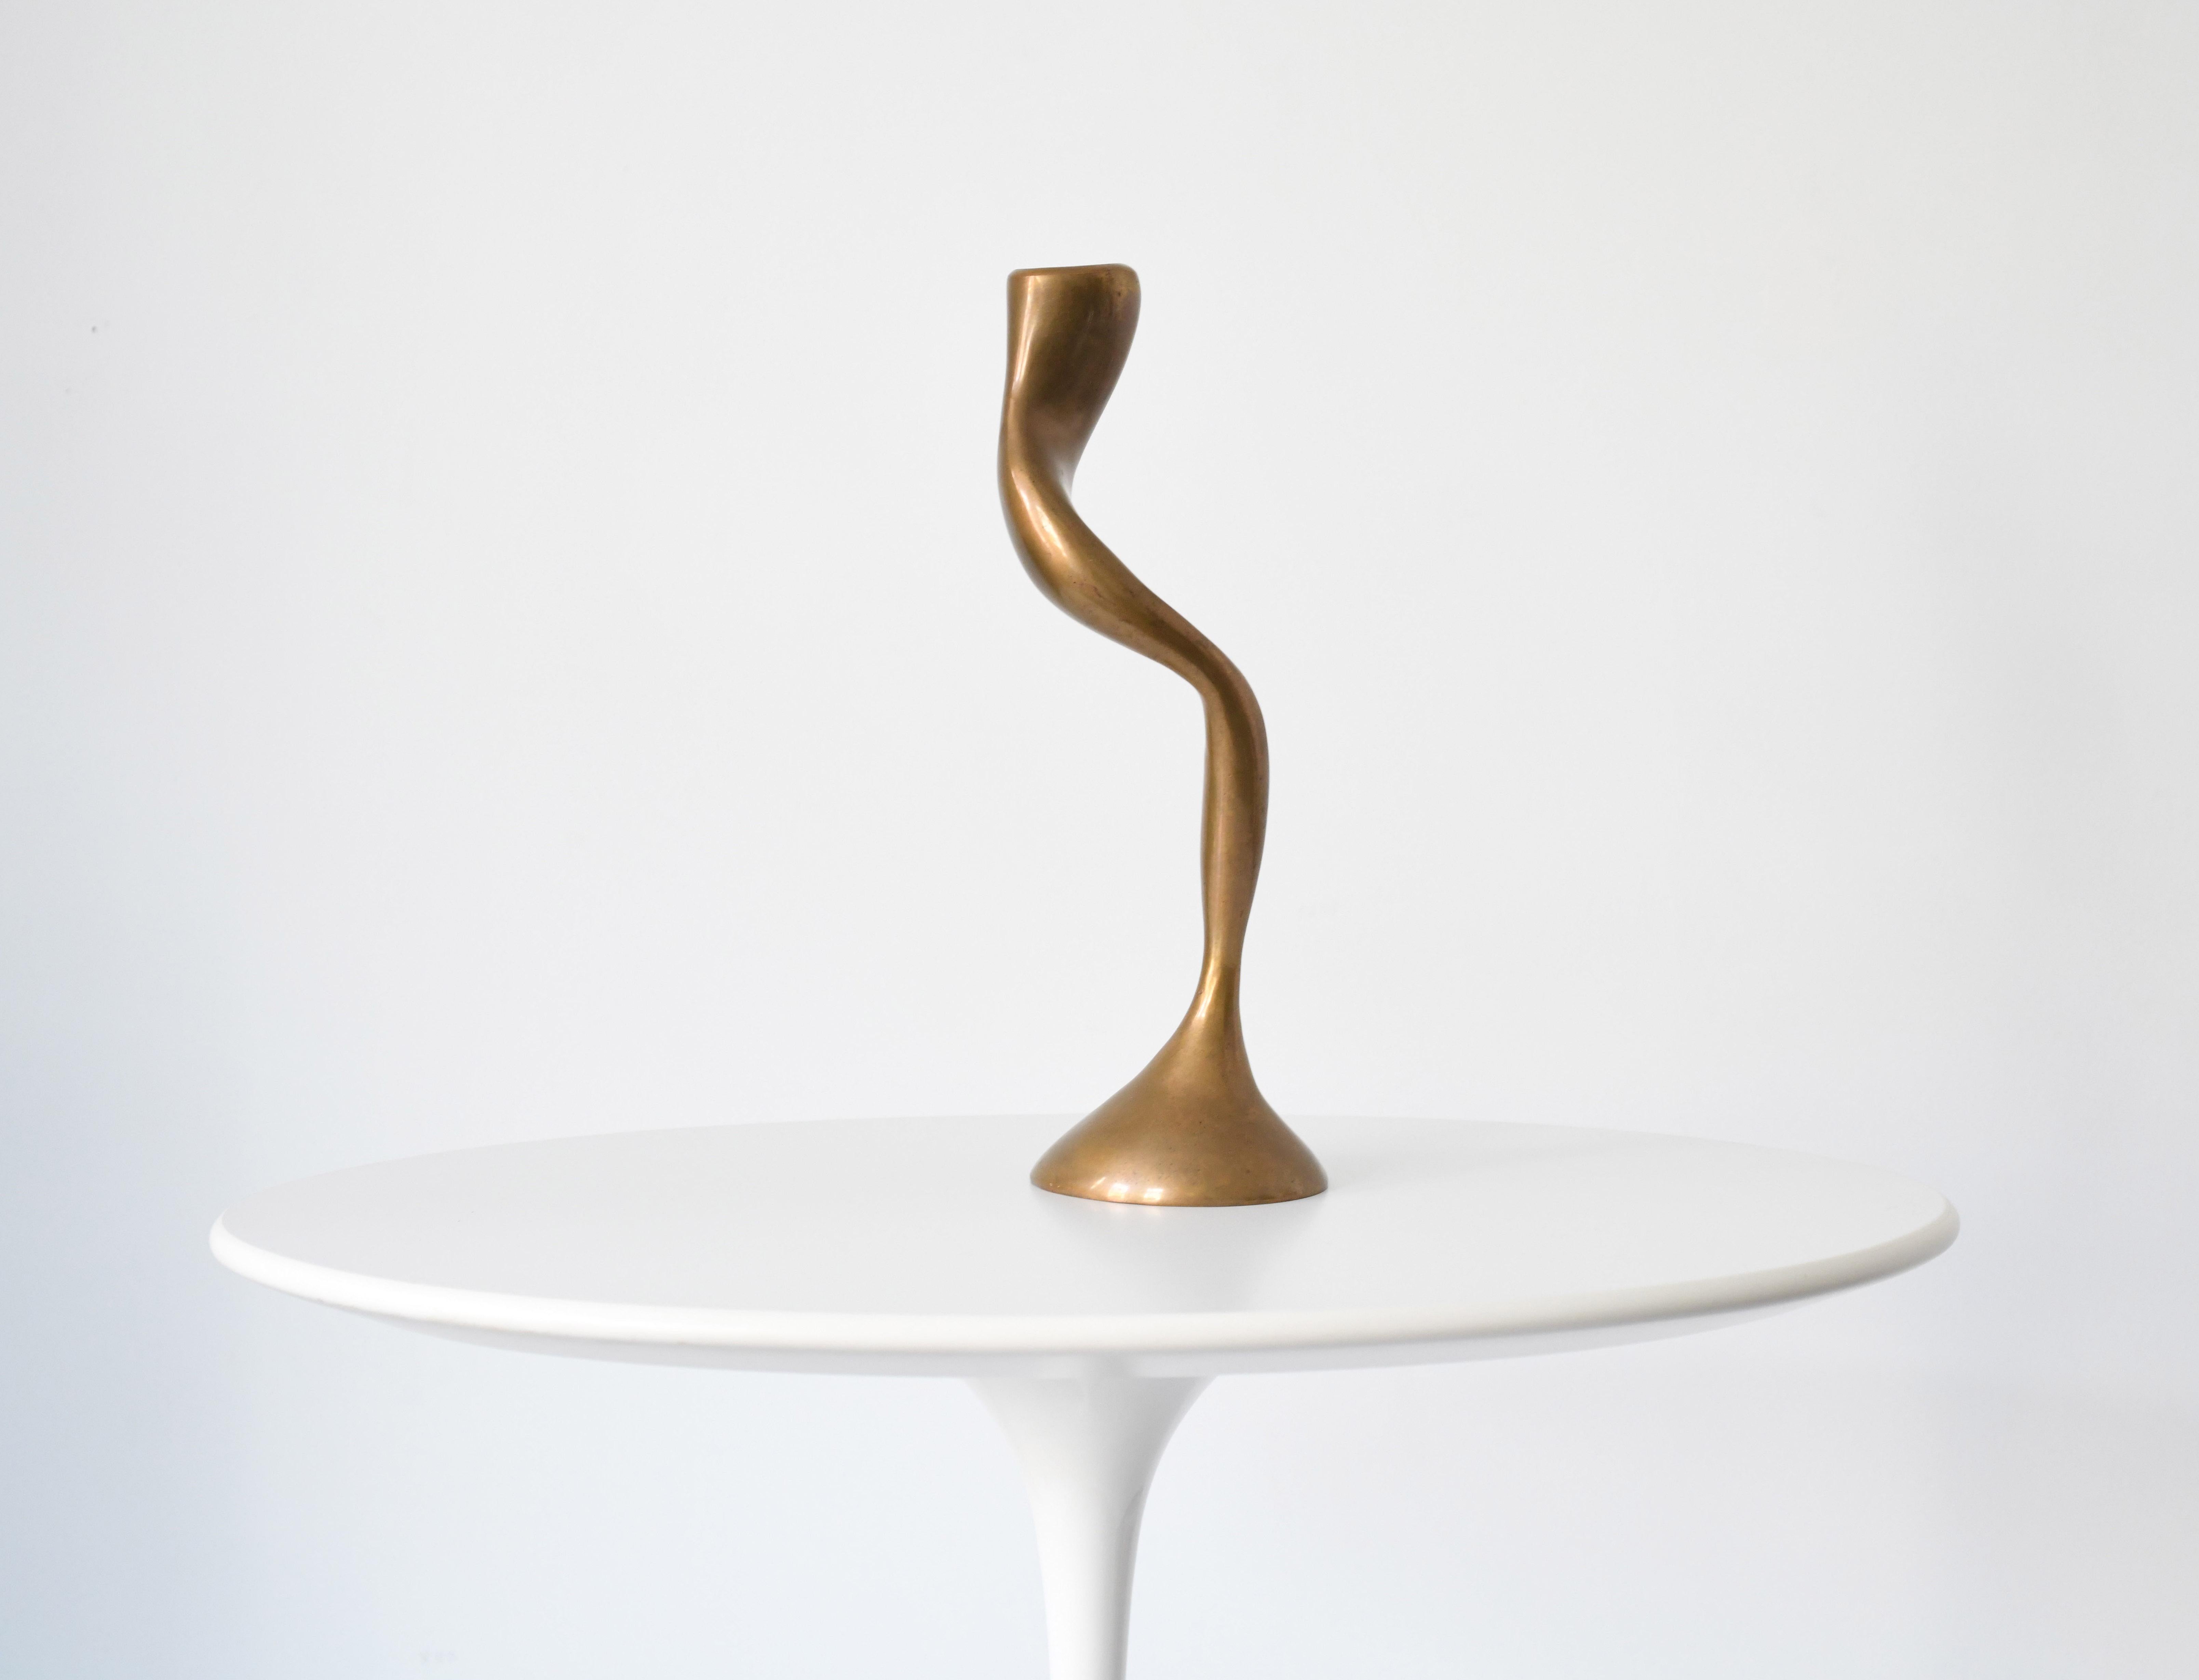 Bronze Anna Mae candlestick by Jordan Mozer.  Created for the Anna Mae, a Japanese-American restaurant in Biloxi, Mississippi at the Beau Rivage Resort Hotel which was destroyed in Hurricane Katrina.  Inspired by Asian curly willow trees.